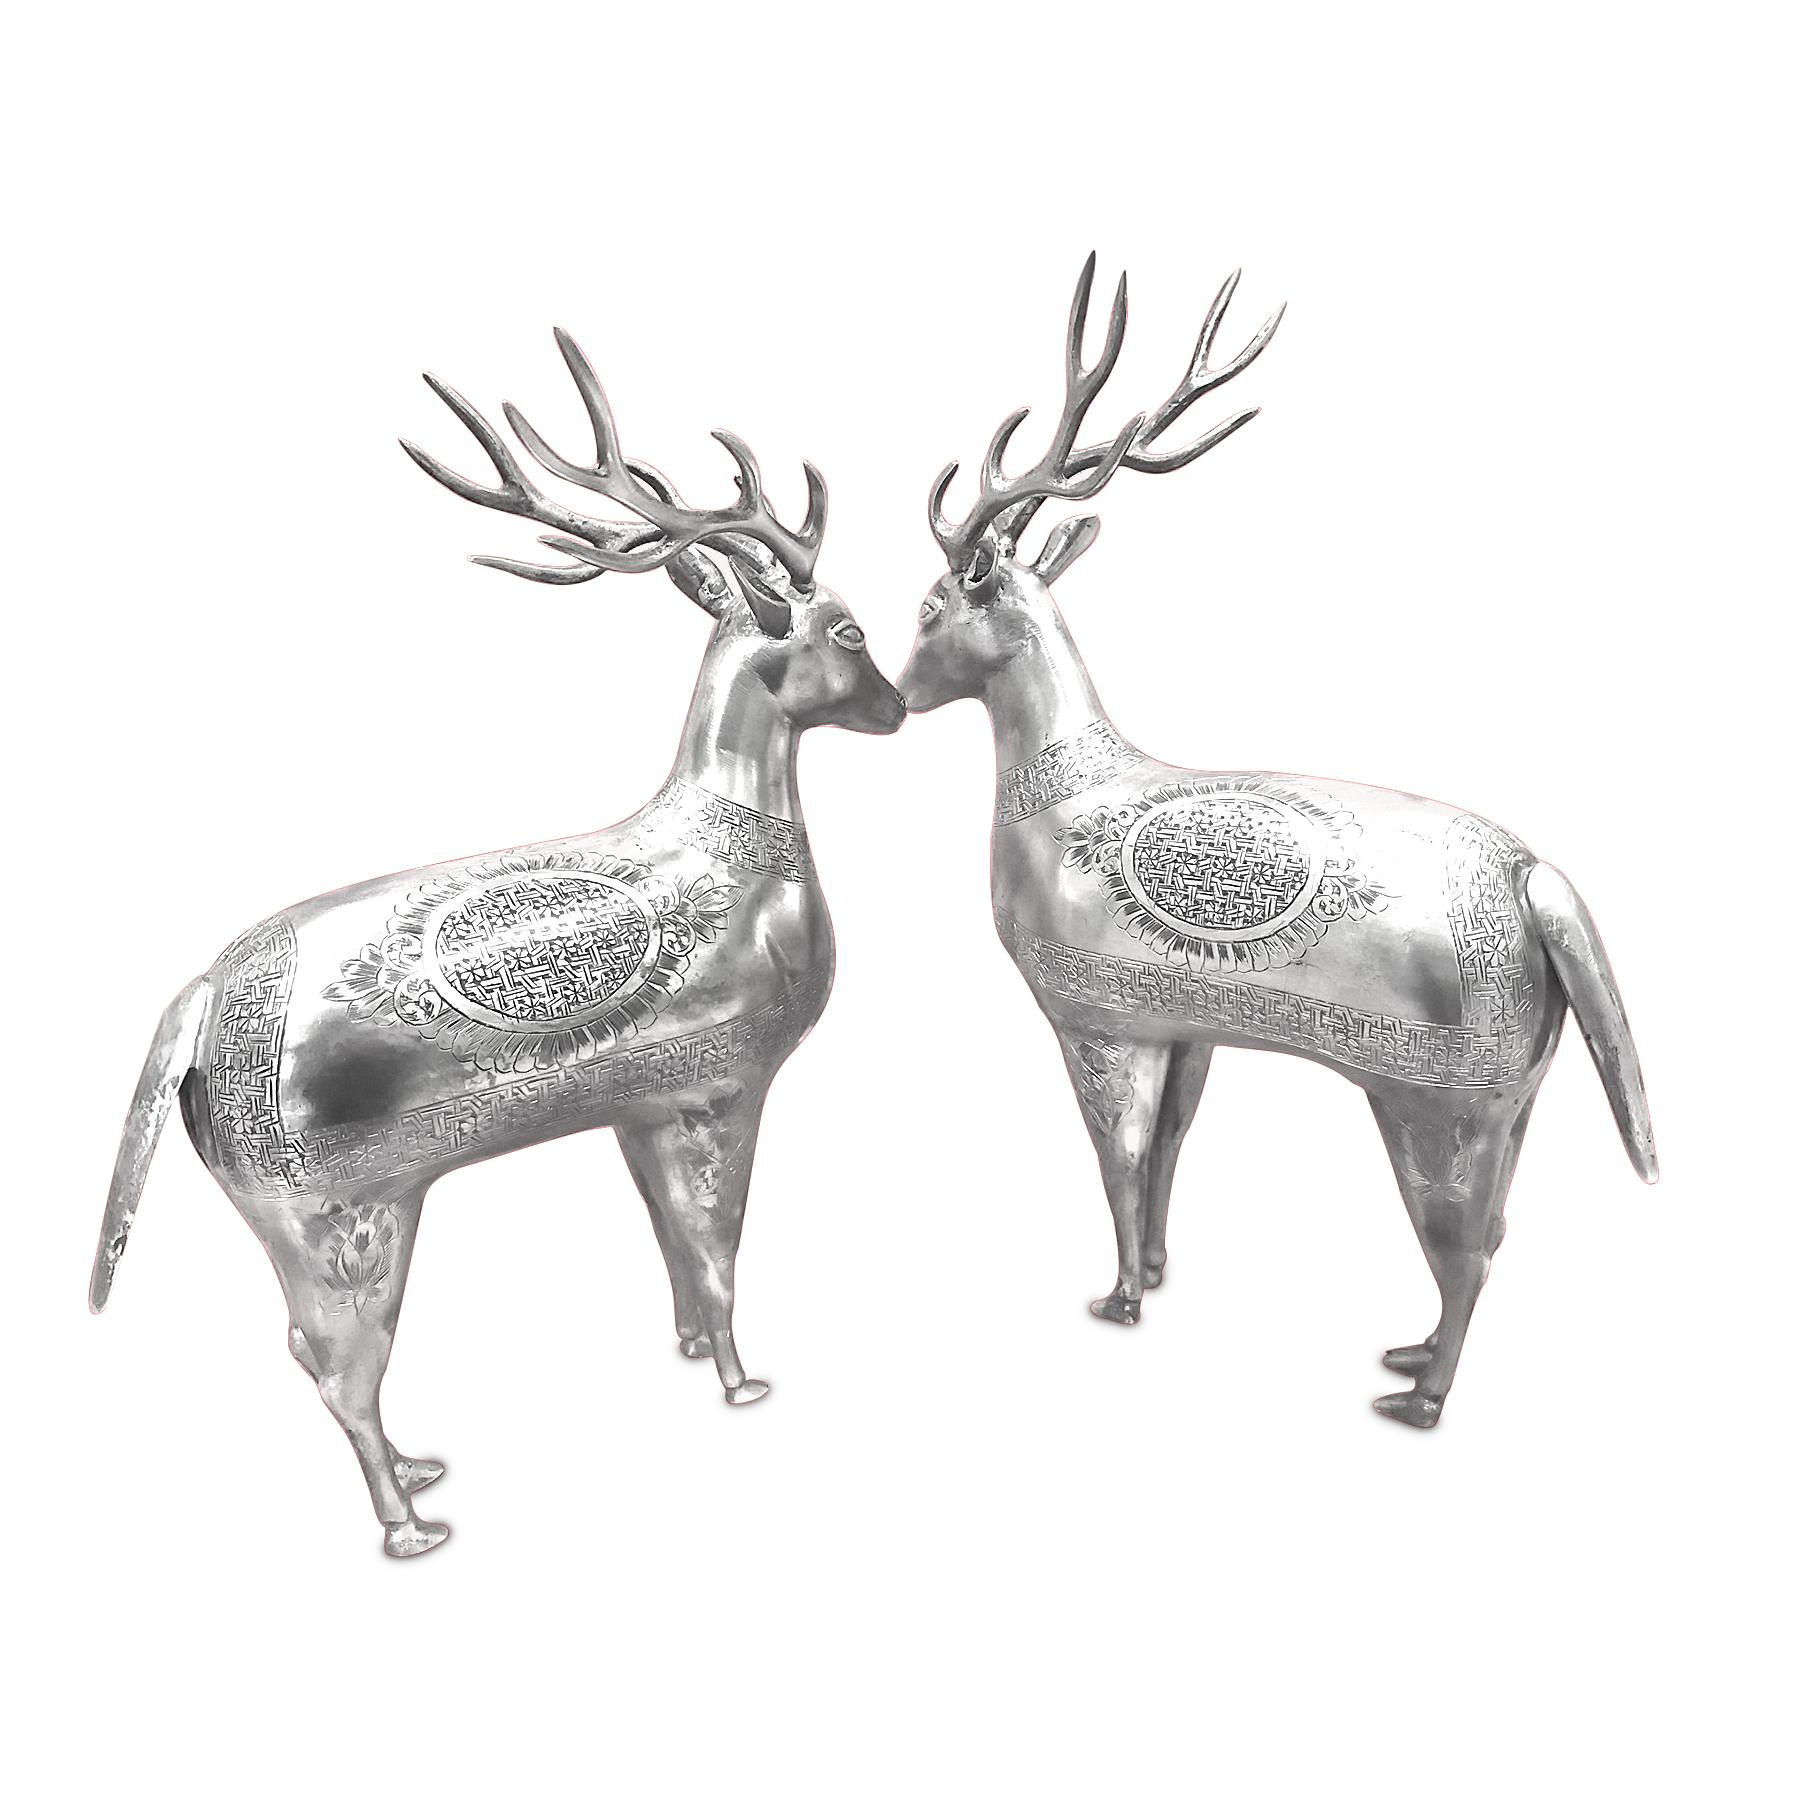 Art Deco Antique, Gorgeous, Rare Pair of Deer Figurines in Silver, Handmade, Persian For Sale